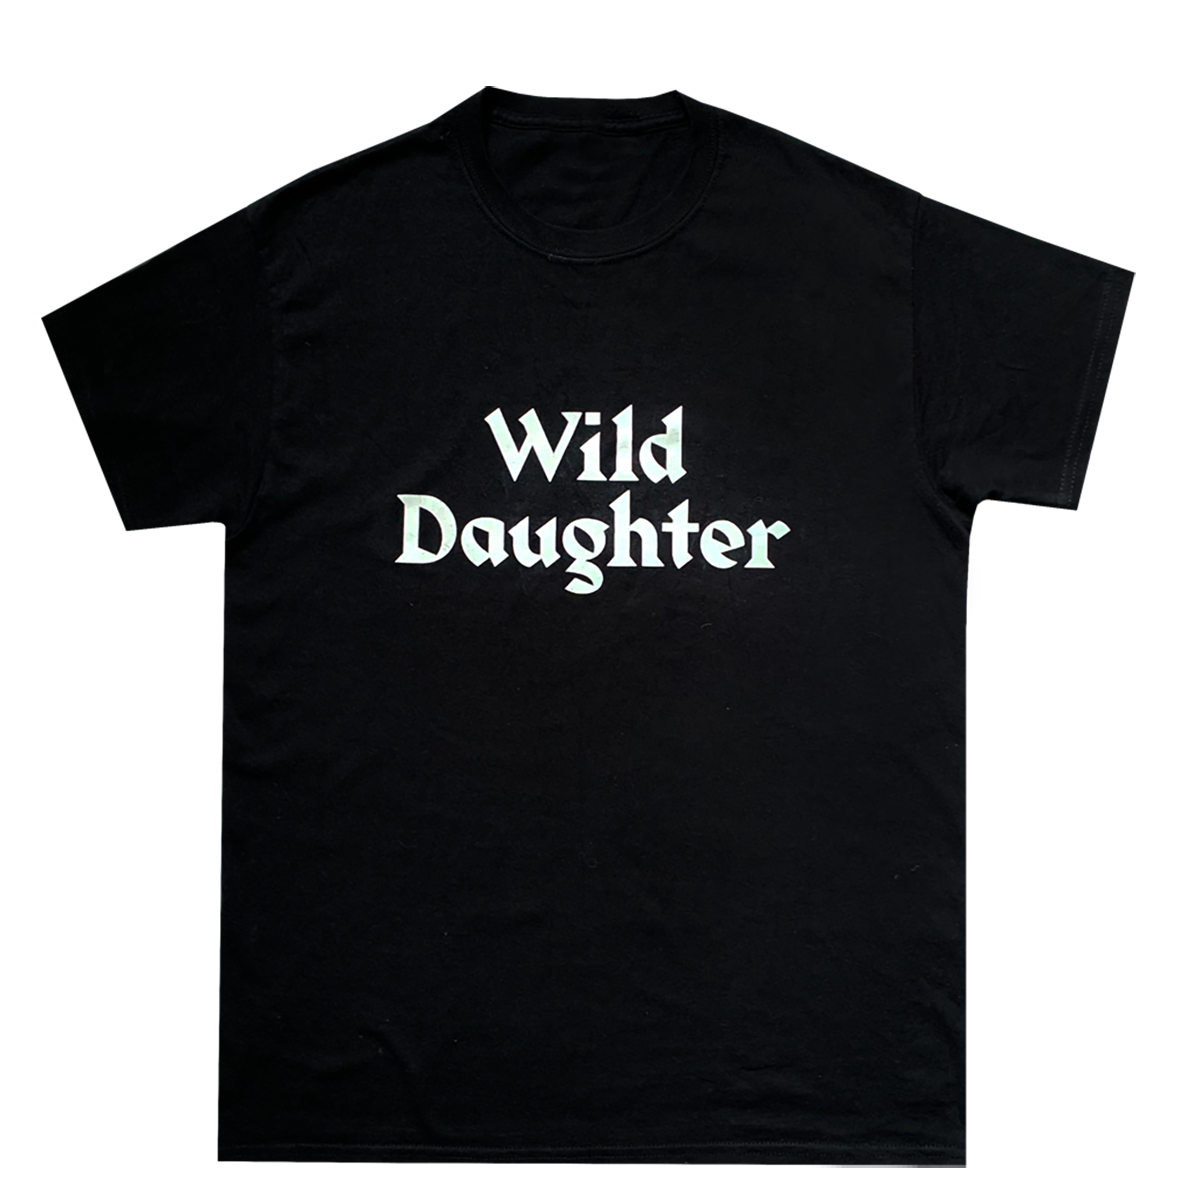 Wild Daughter - Black T-shirt (01 Editions)